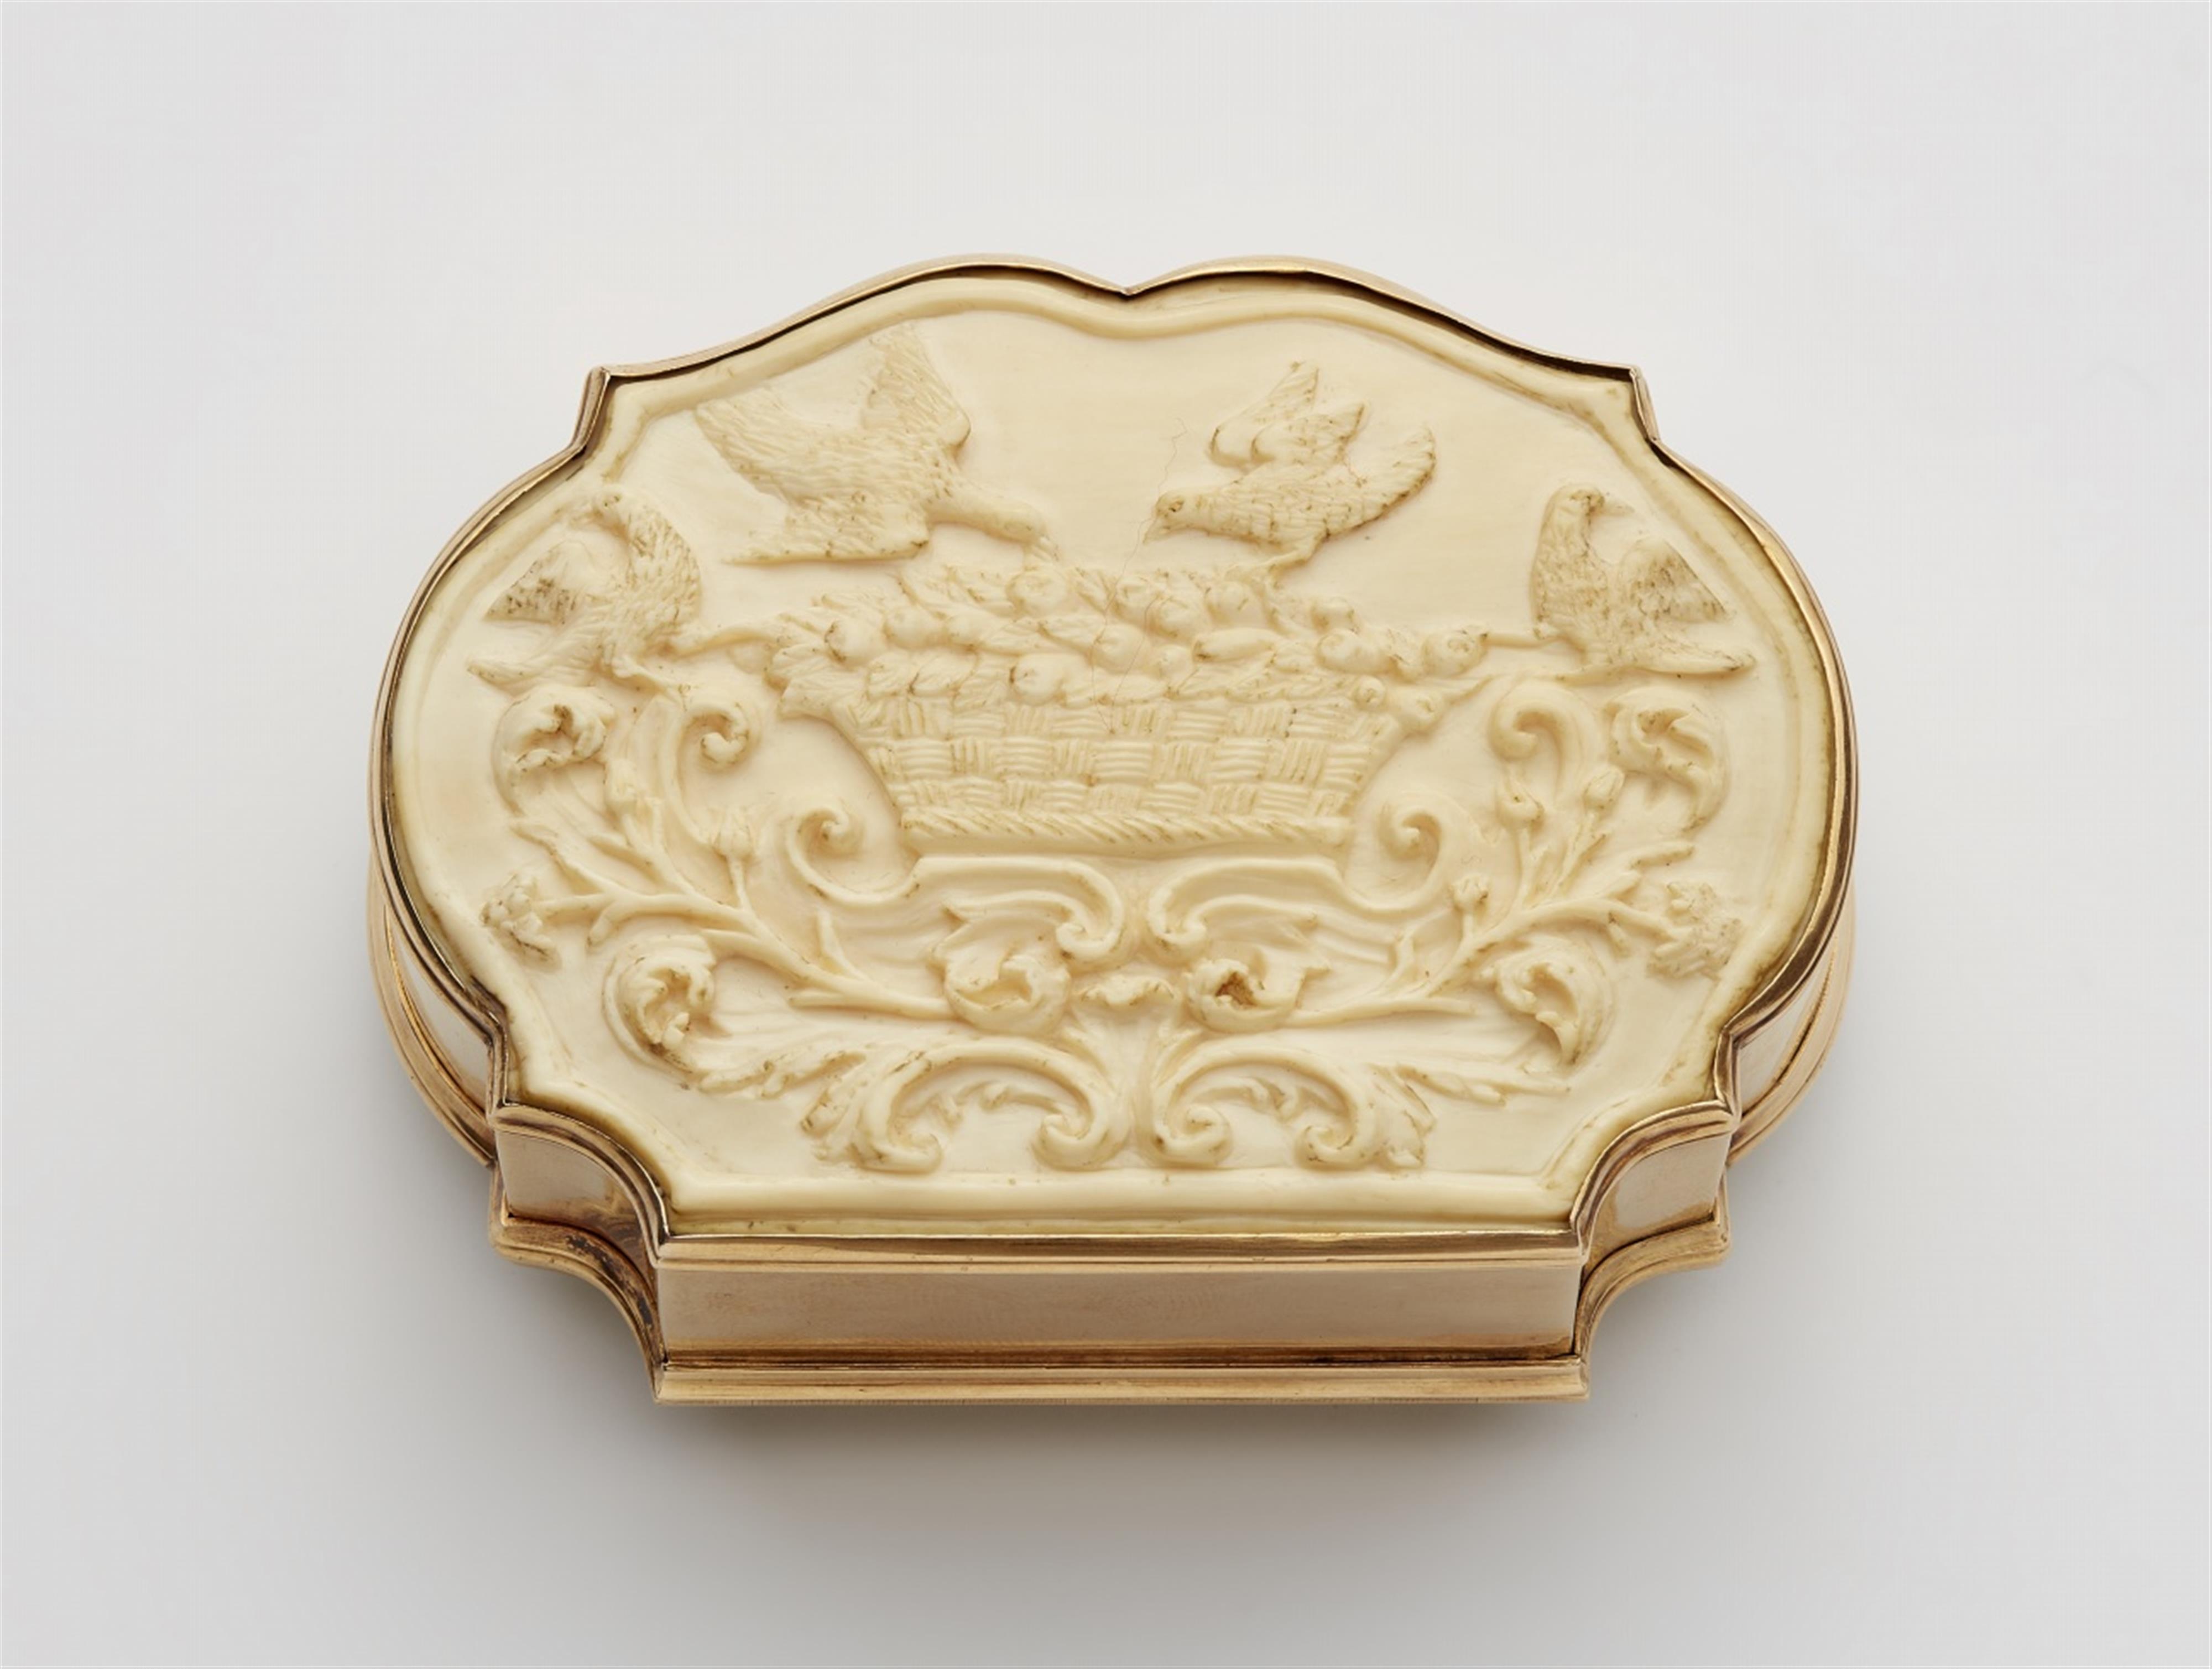 A 14k gold snuff box with ivory reliefs - image-2